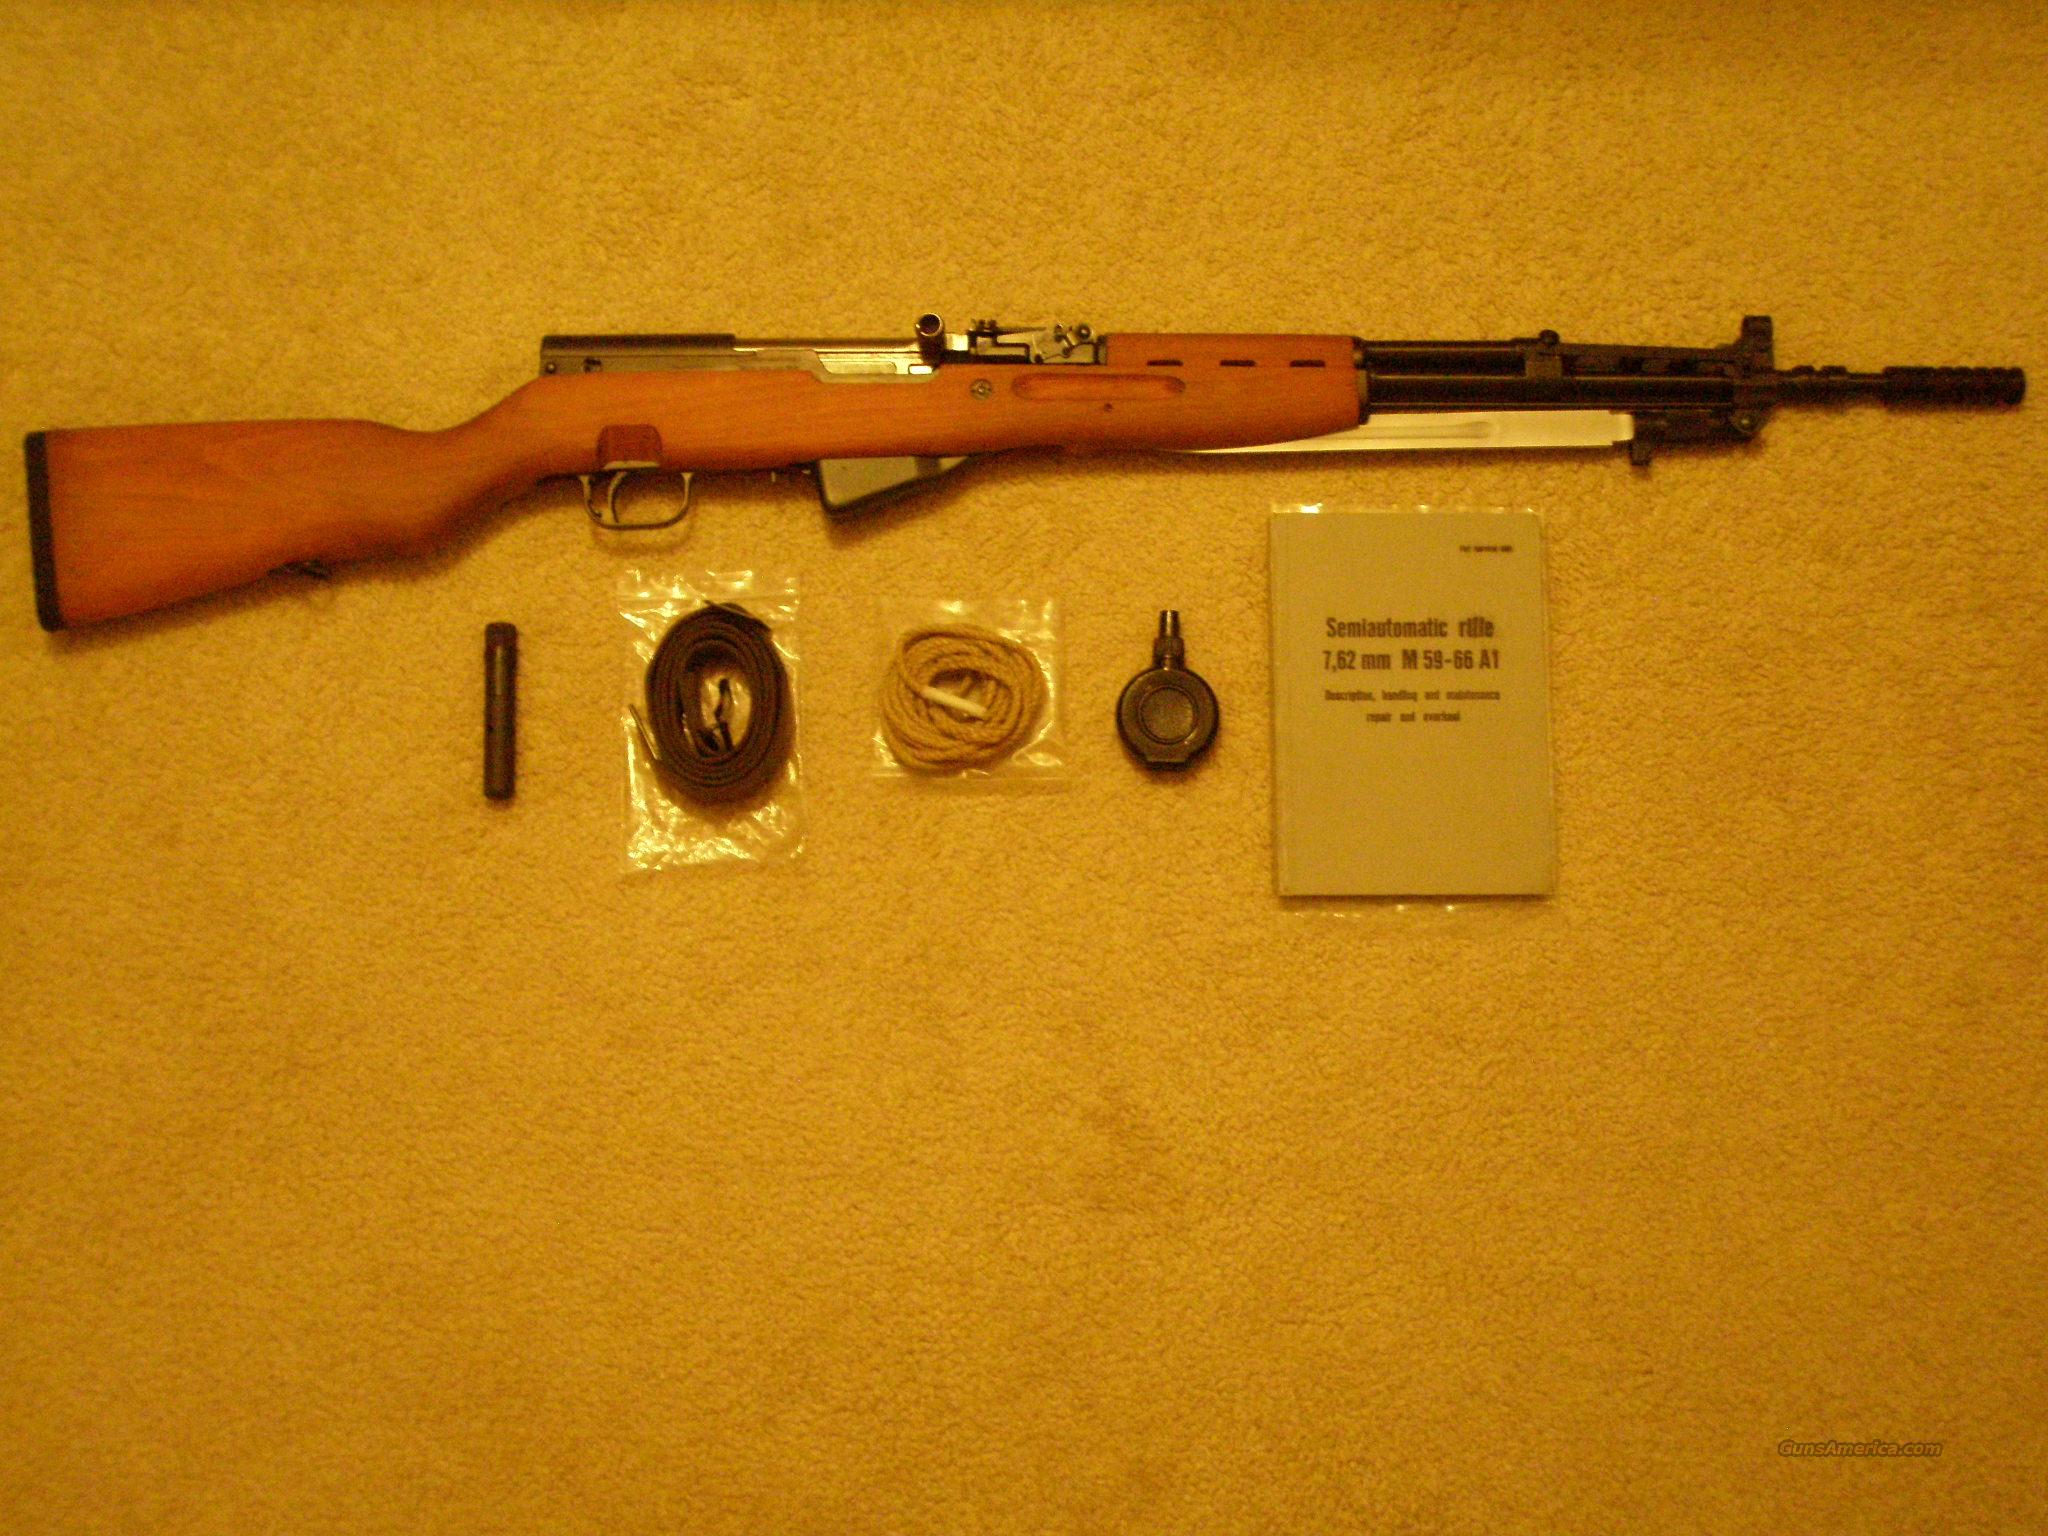 Yugo M59 66a1 7 62x39mm Sks Rifle Mitchell Arms For Sale